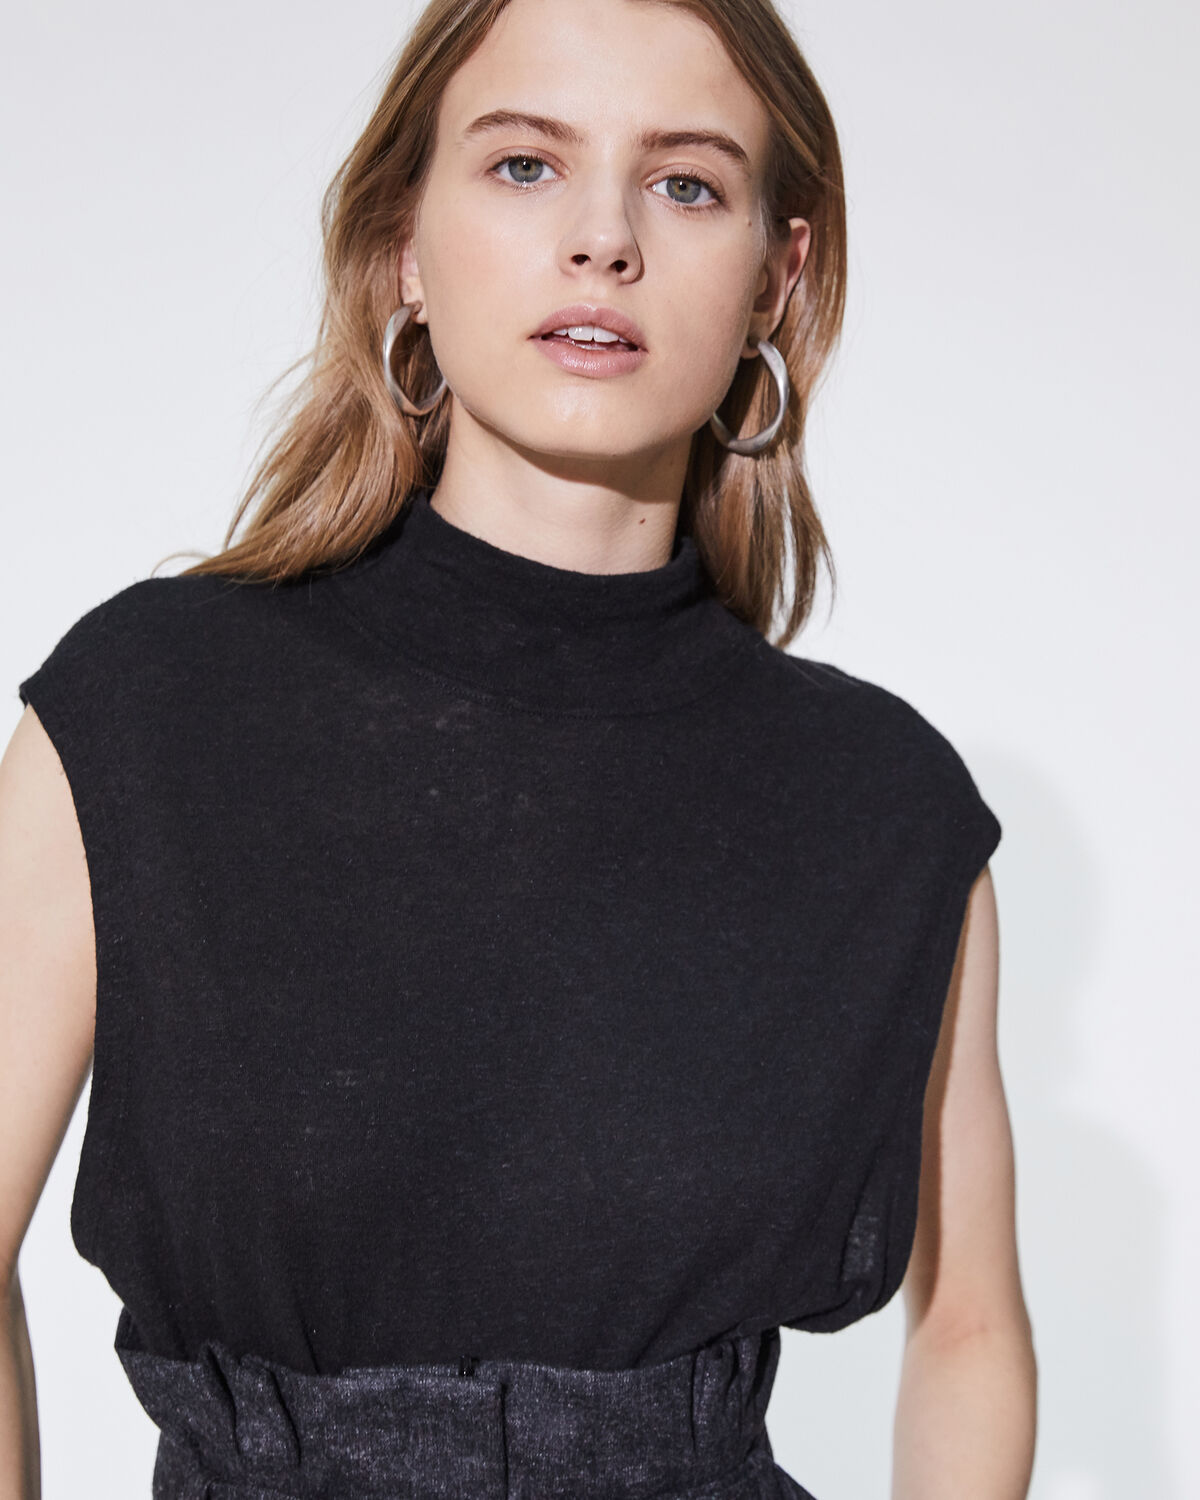 Photo of IRO Paris Heart Tank Top Black - This T-shirt Made From Linen And Wool Is A Basic Part Of The Female Wardrobe, Easy To Wear With The Seasons. It Features A Stand-up Collar, Ideal For An Elegant Look. Fall Winter 19